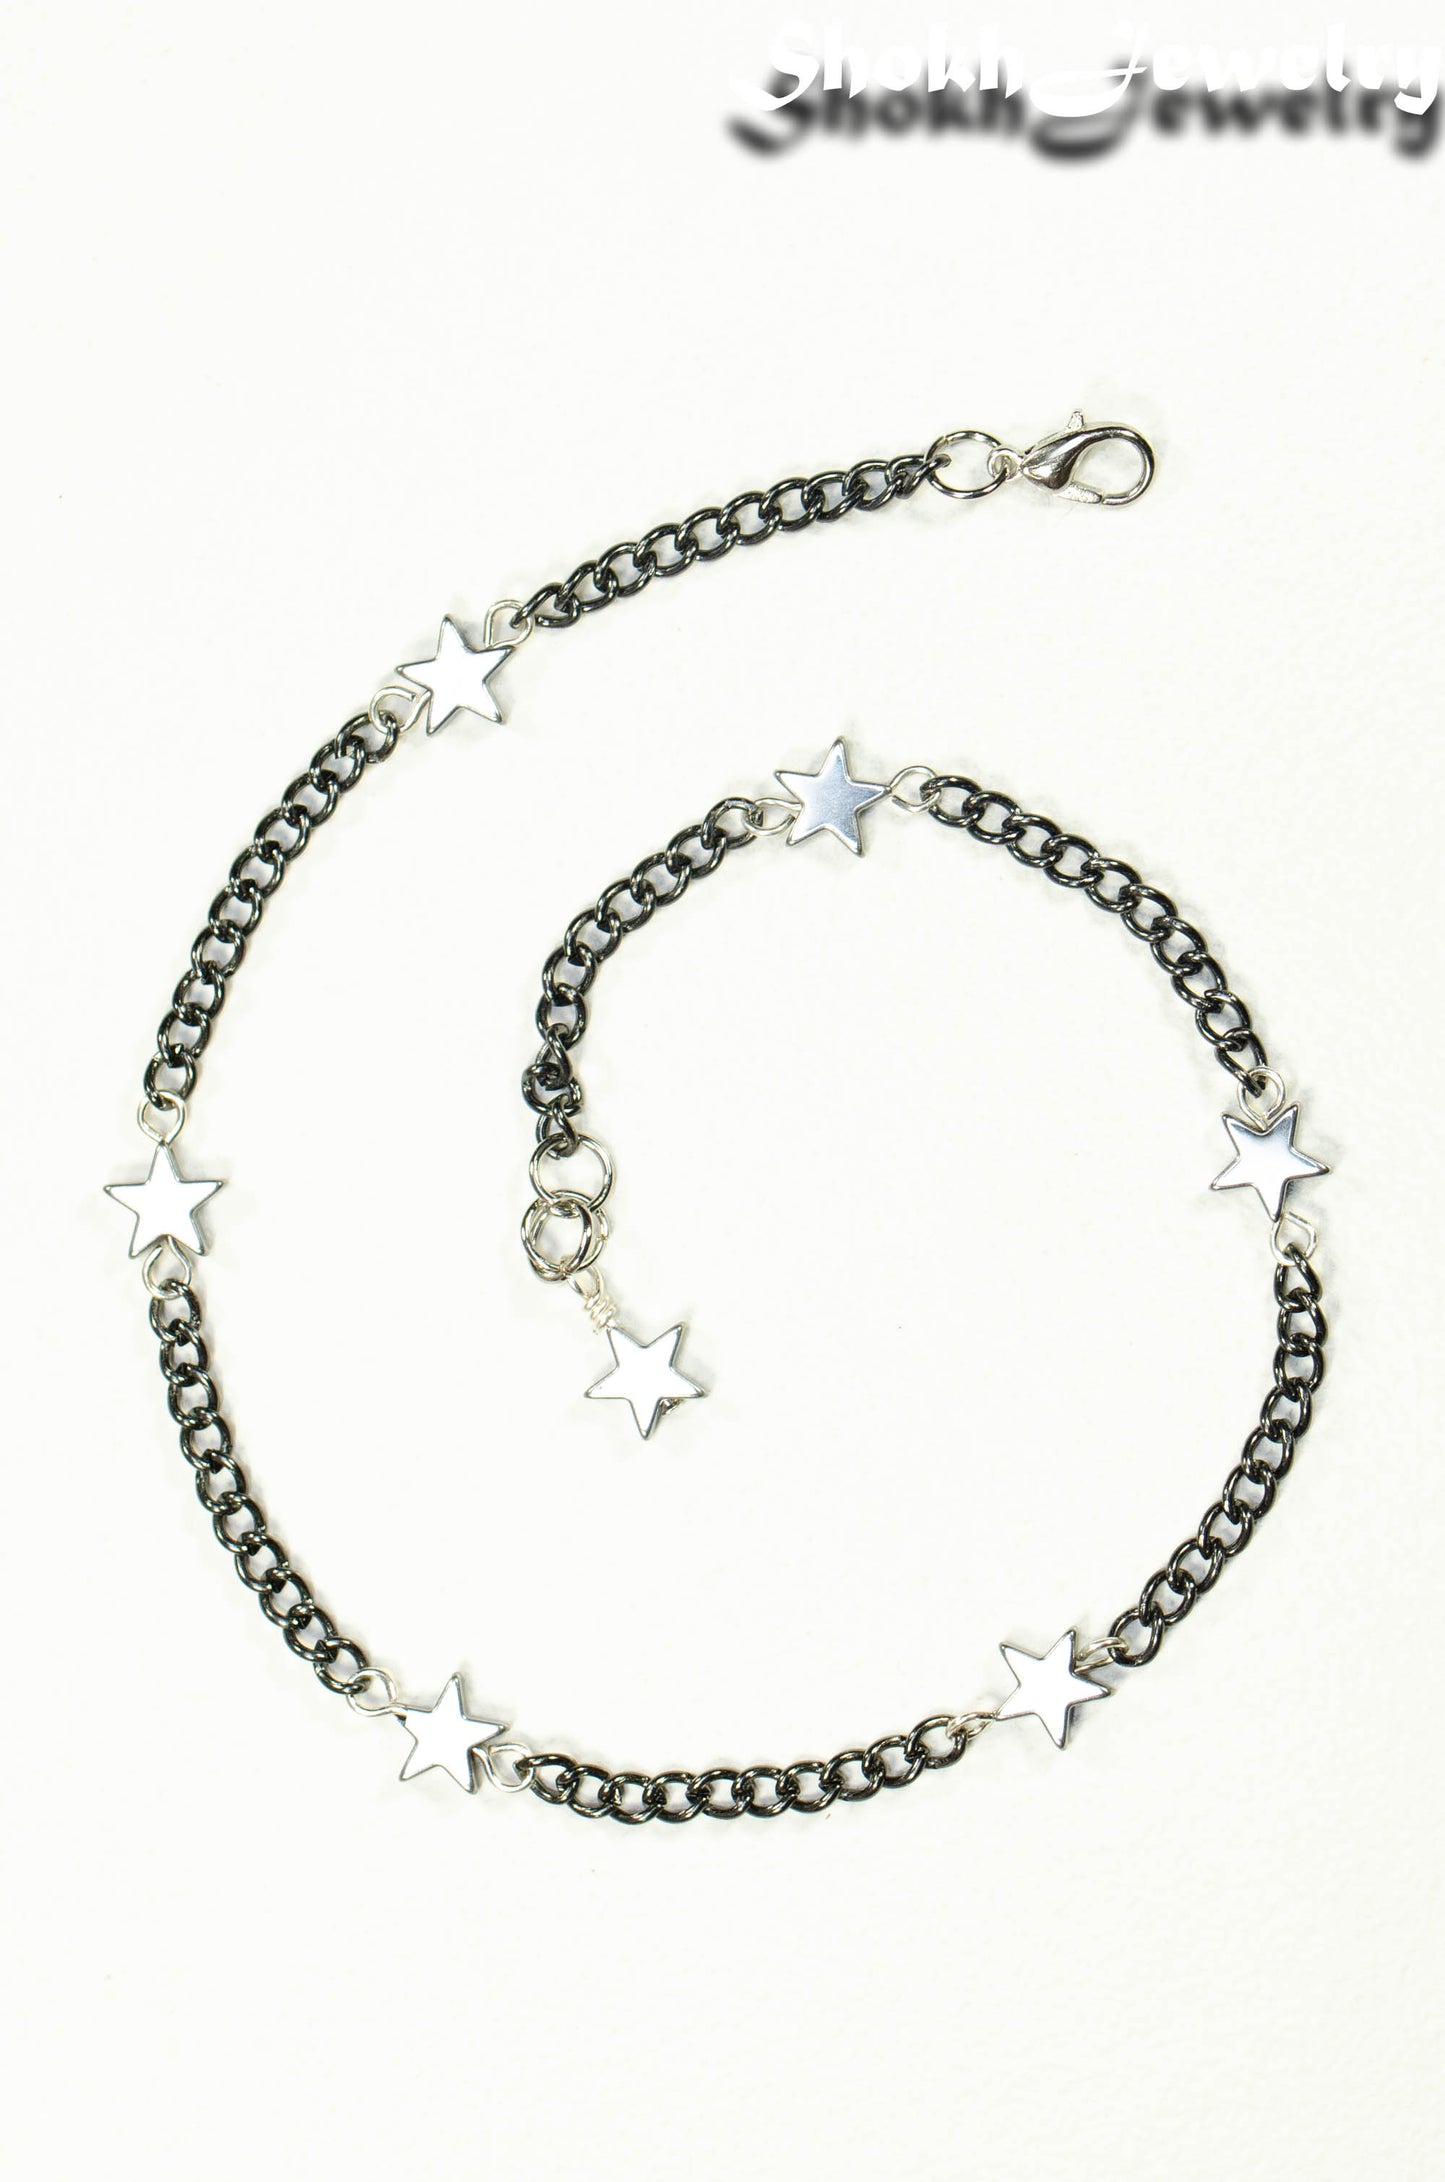 Top view of Natural Hematite Star and Black Chain Anklet.